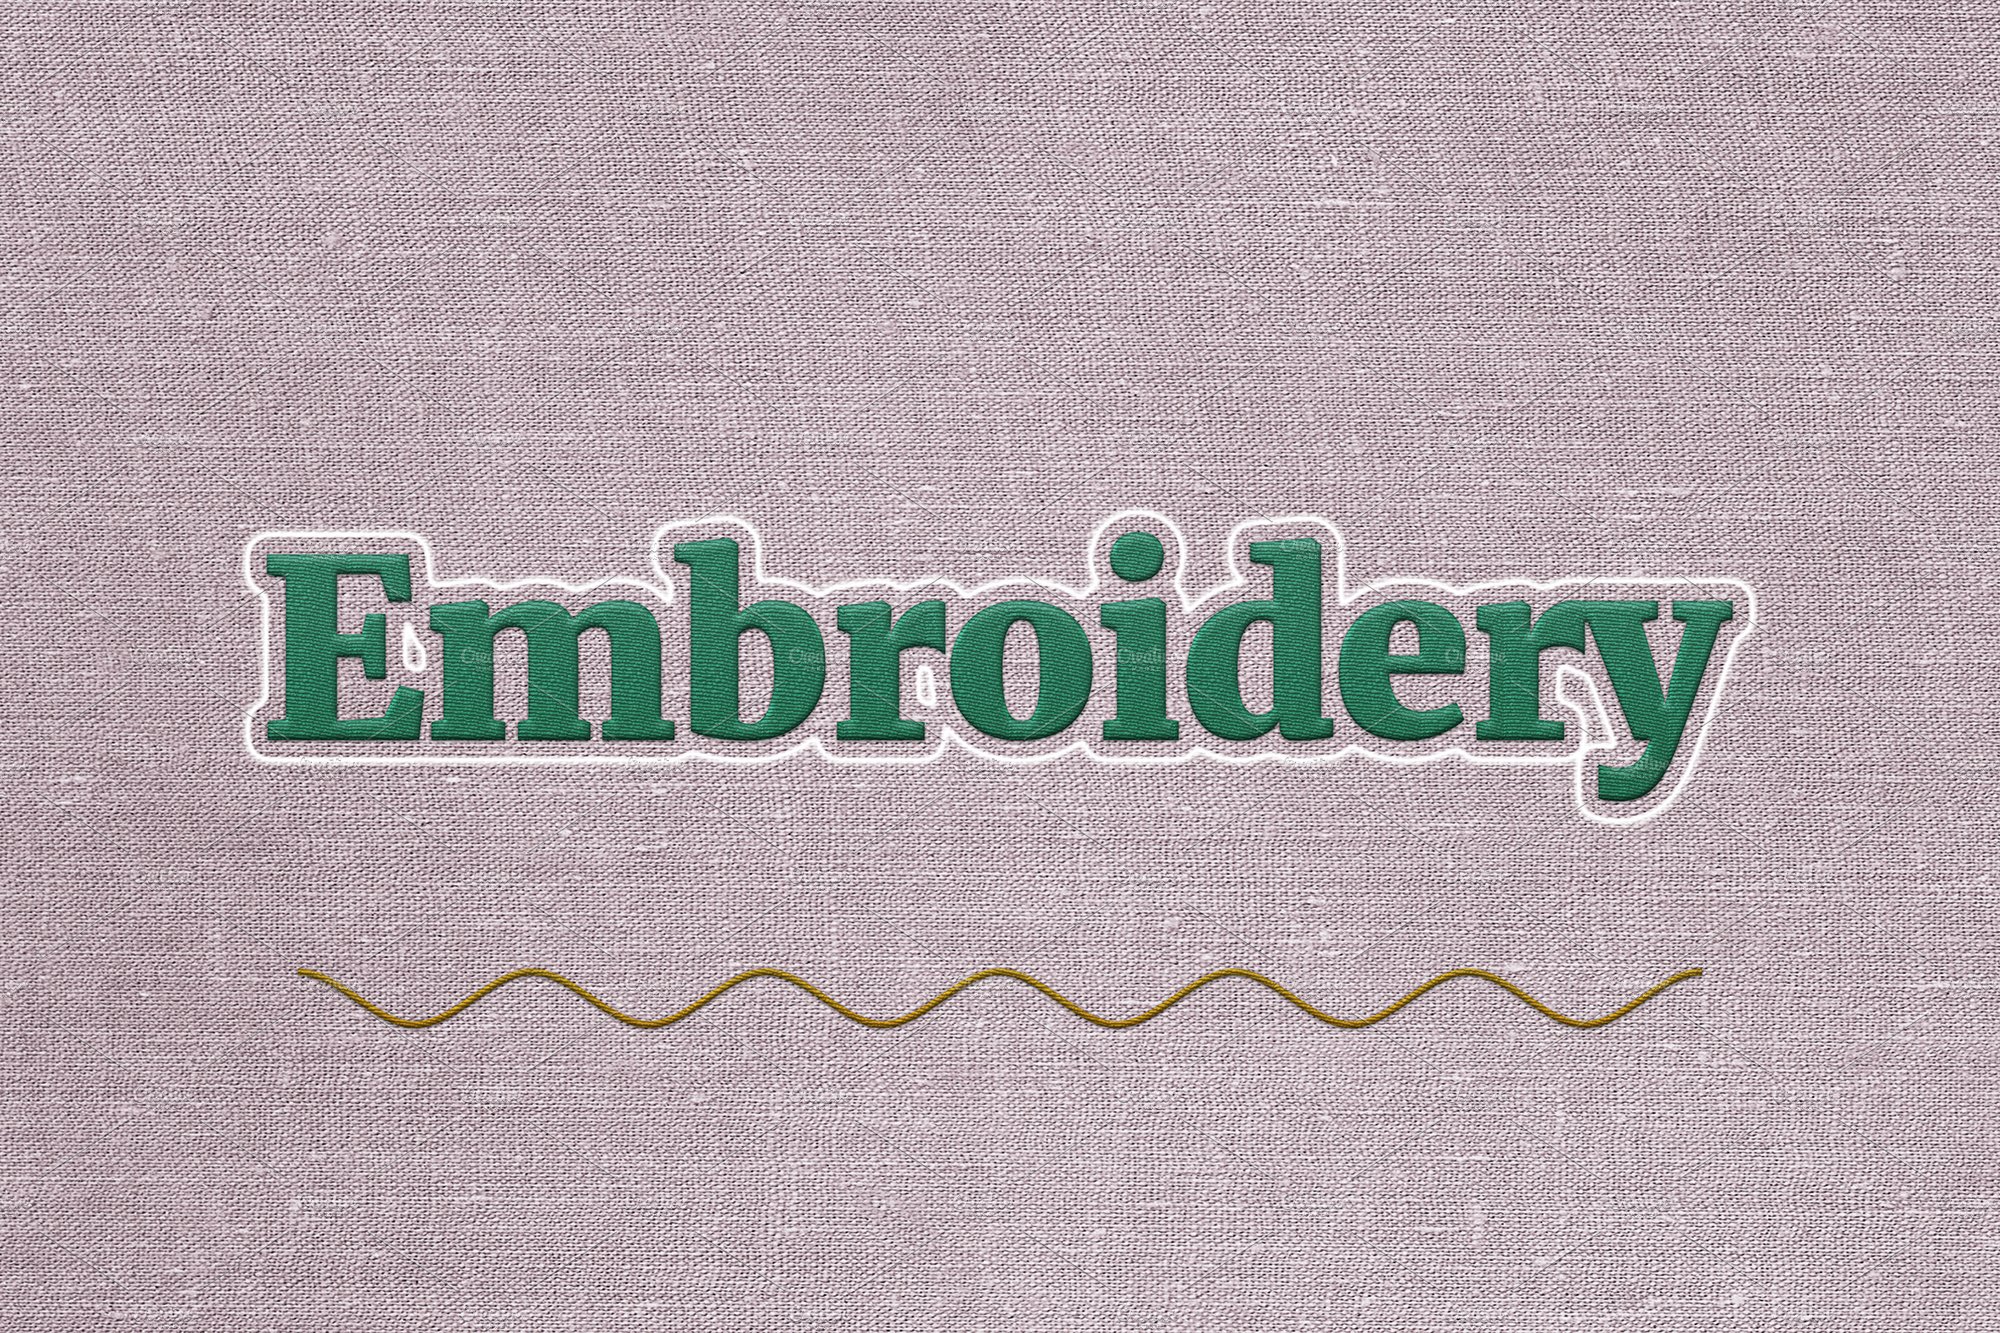 Embroidery Text Effect & Layer Stylecover image.